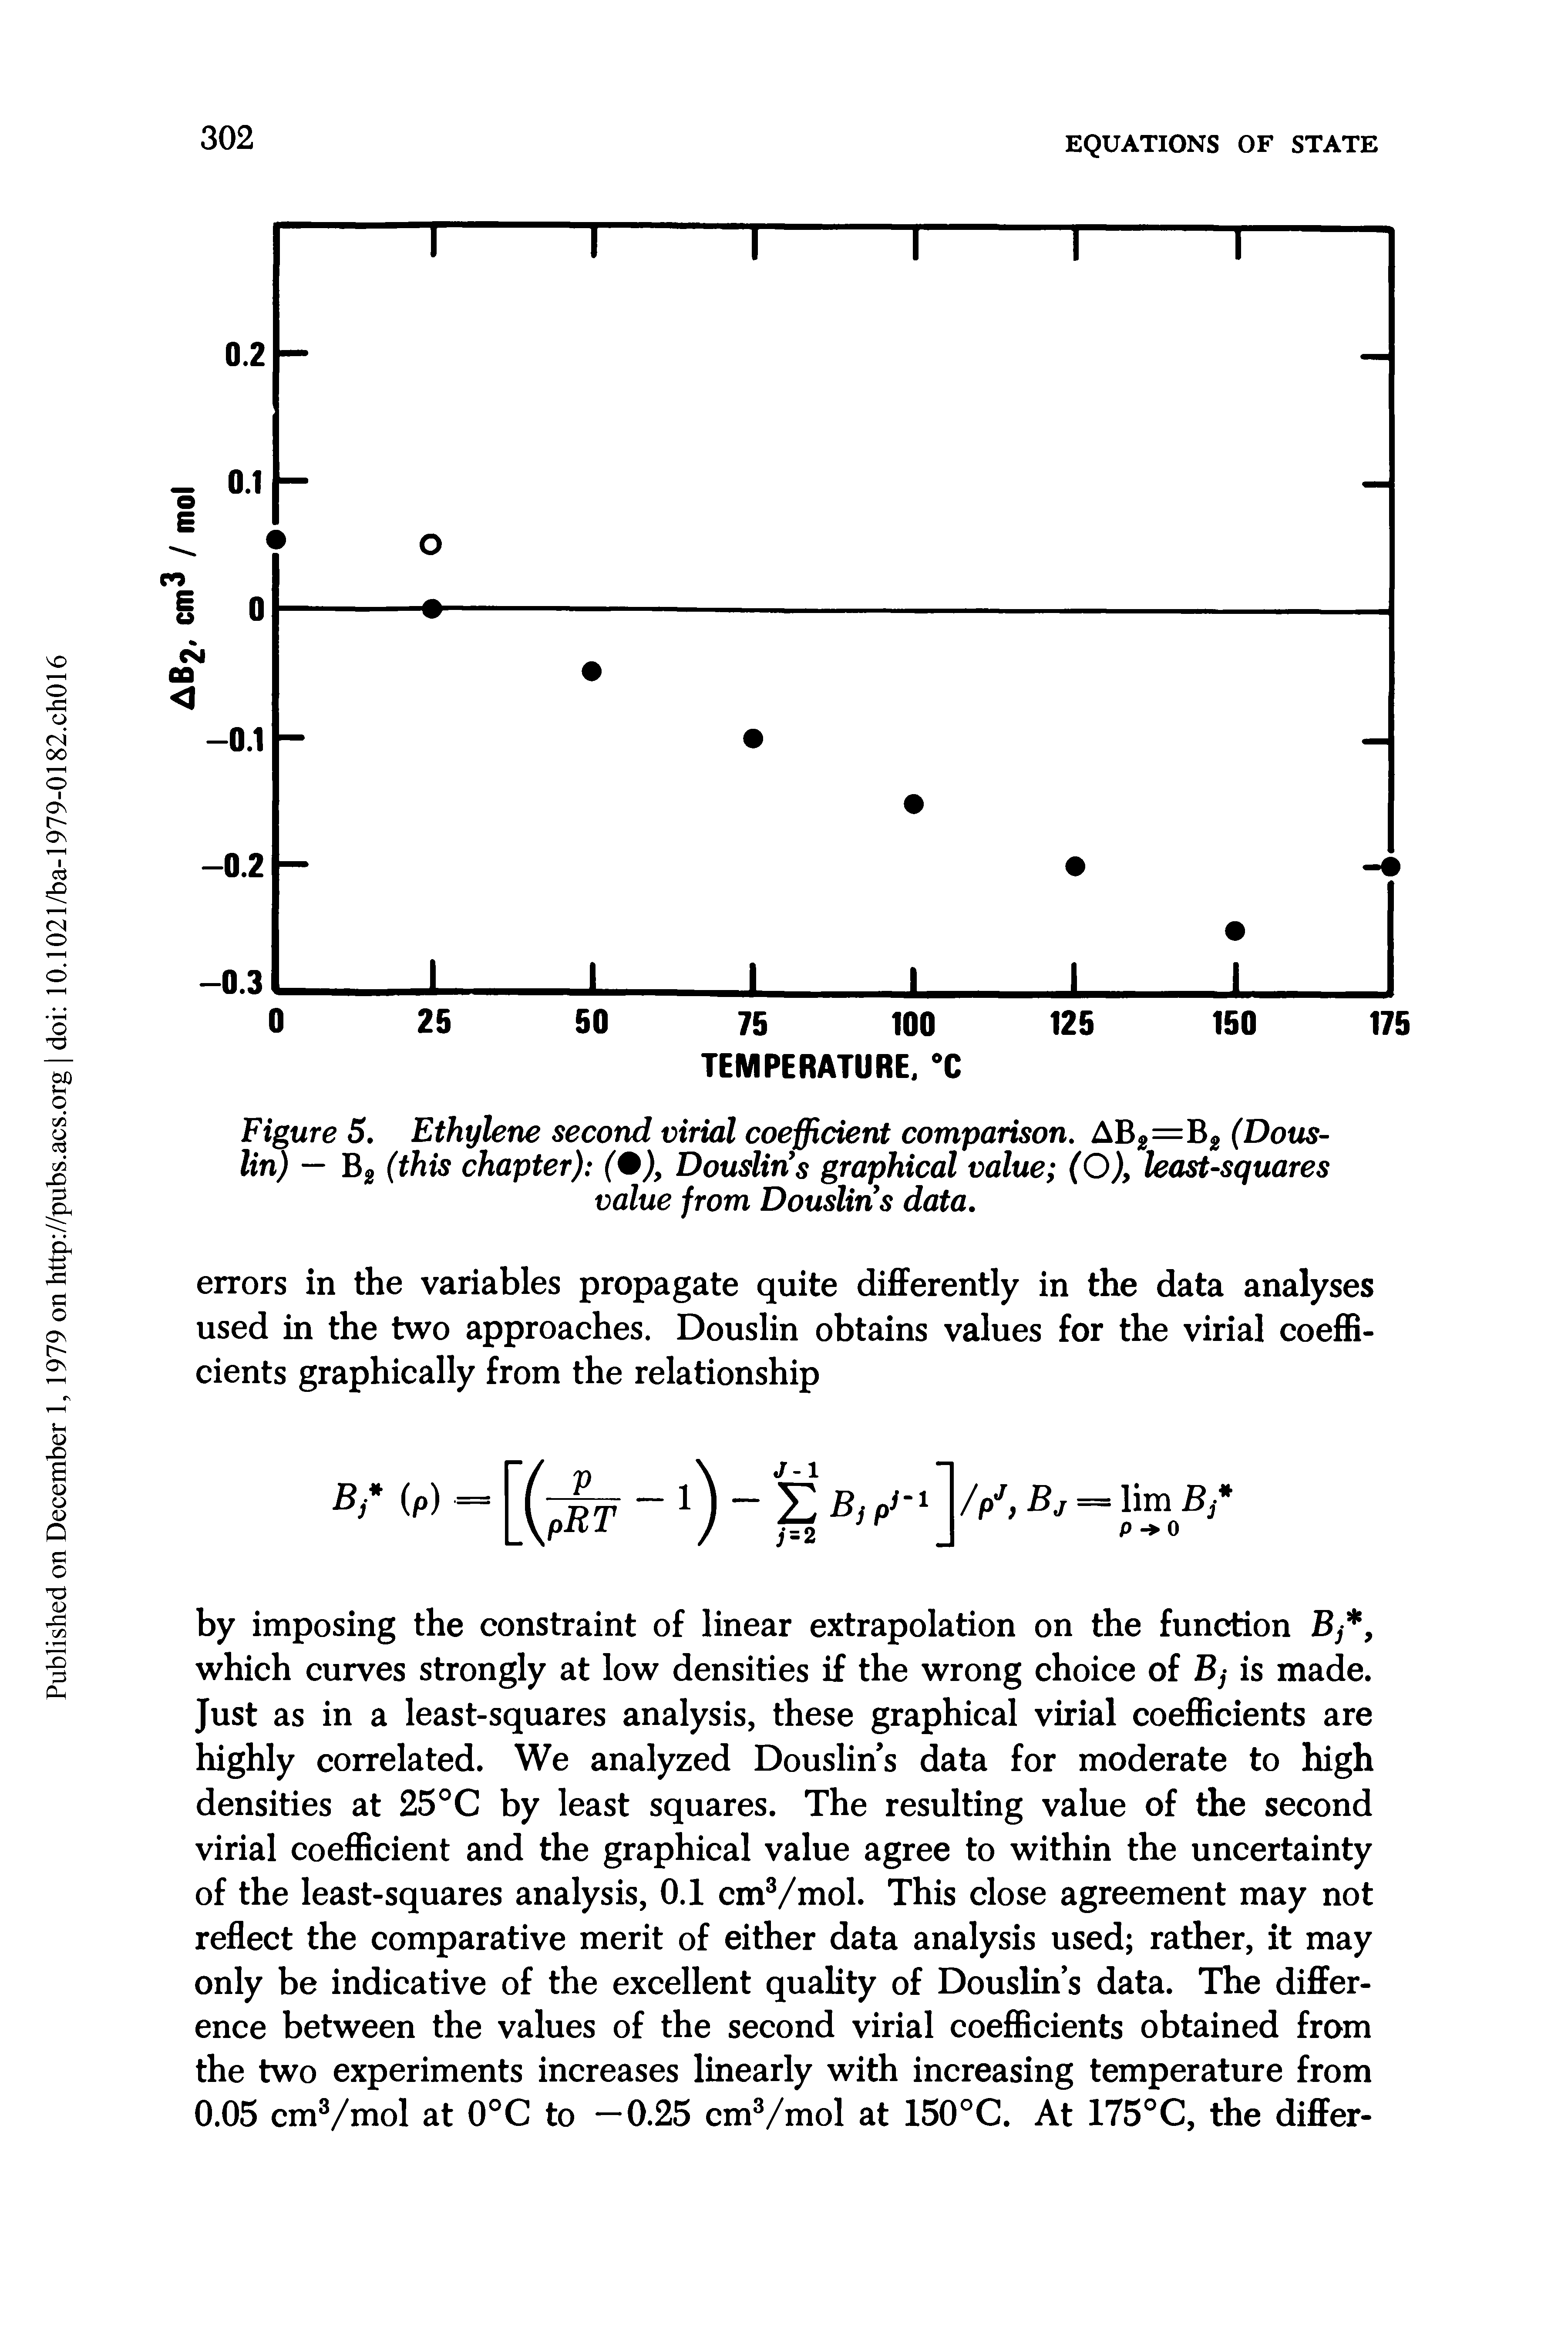 Figure 5. Ethylene second virial coefficient comparison. AB2=B2 (Dous-lin) — B2 (this chapter) (%), Douslins graphical value (O), least-squares value from Douslins data.